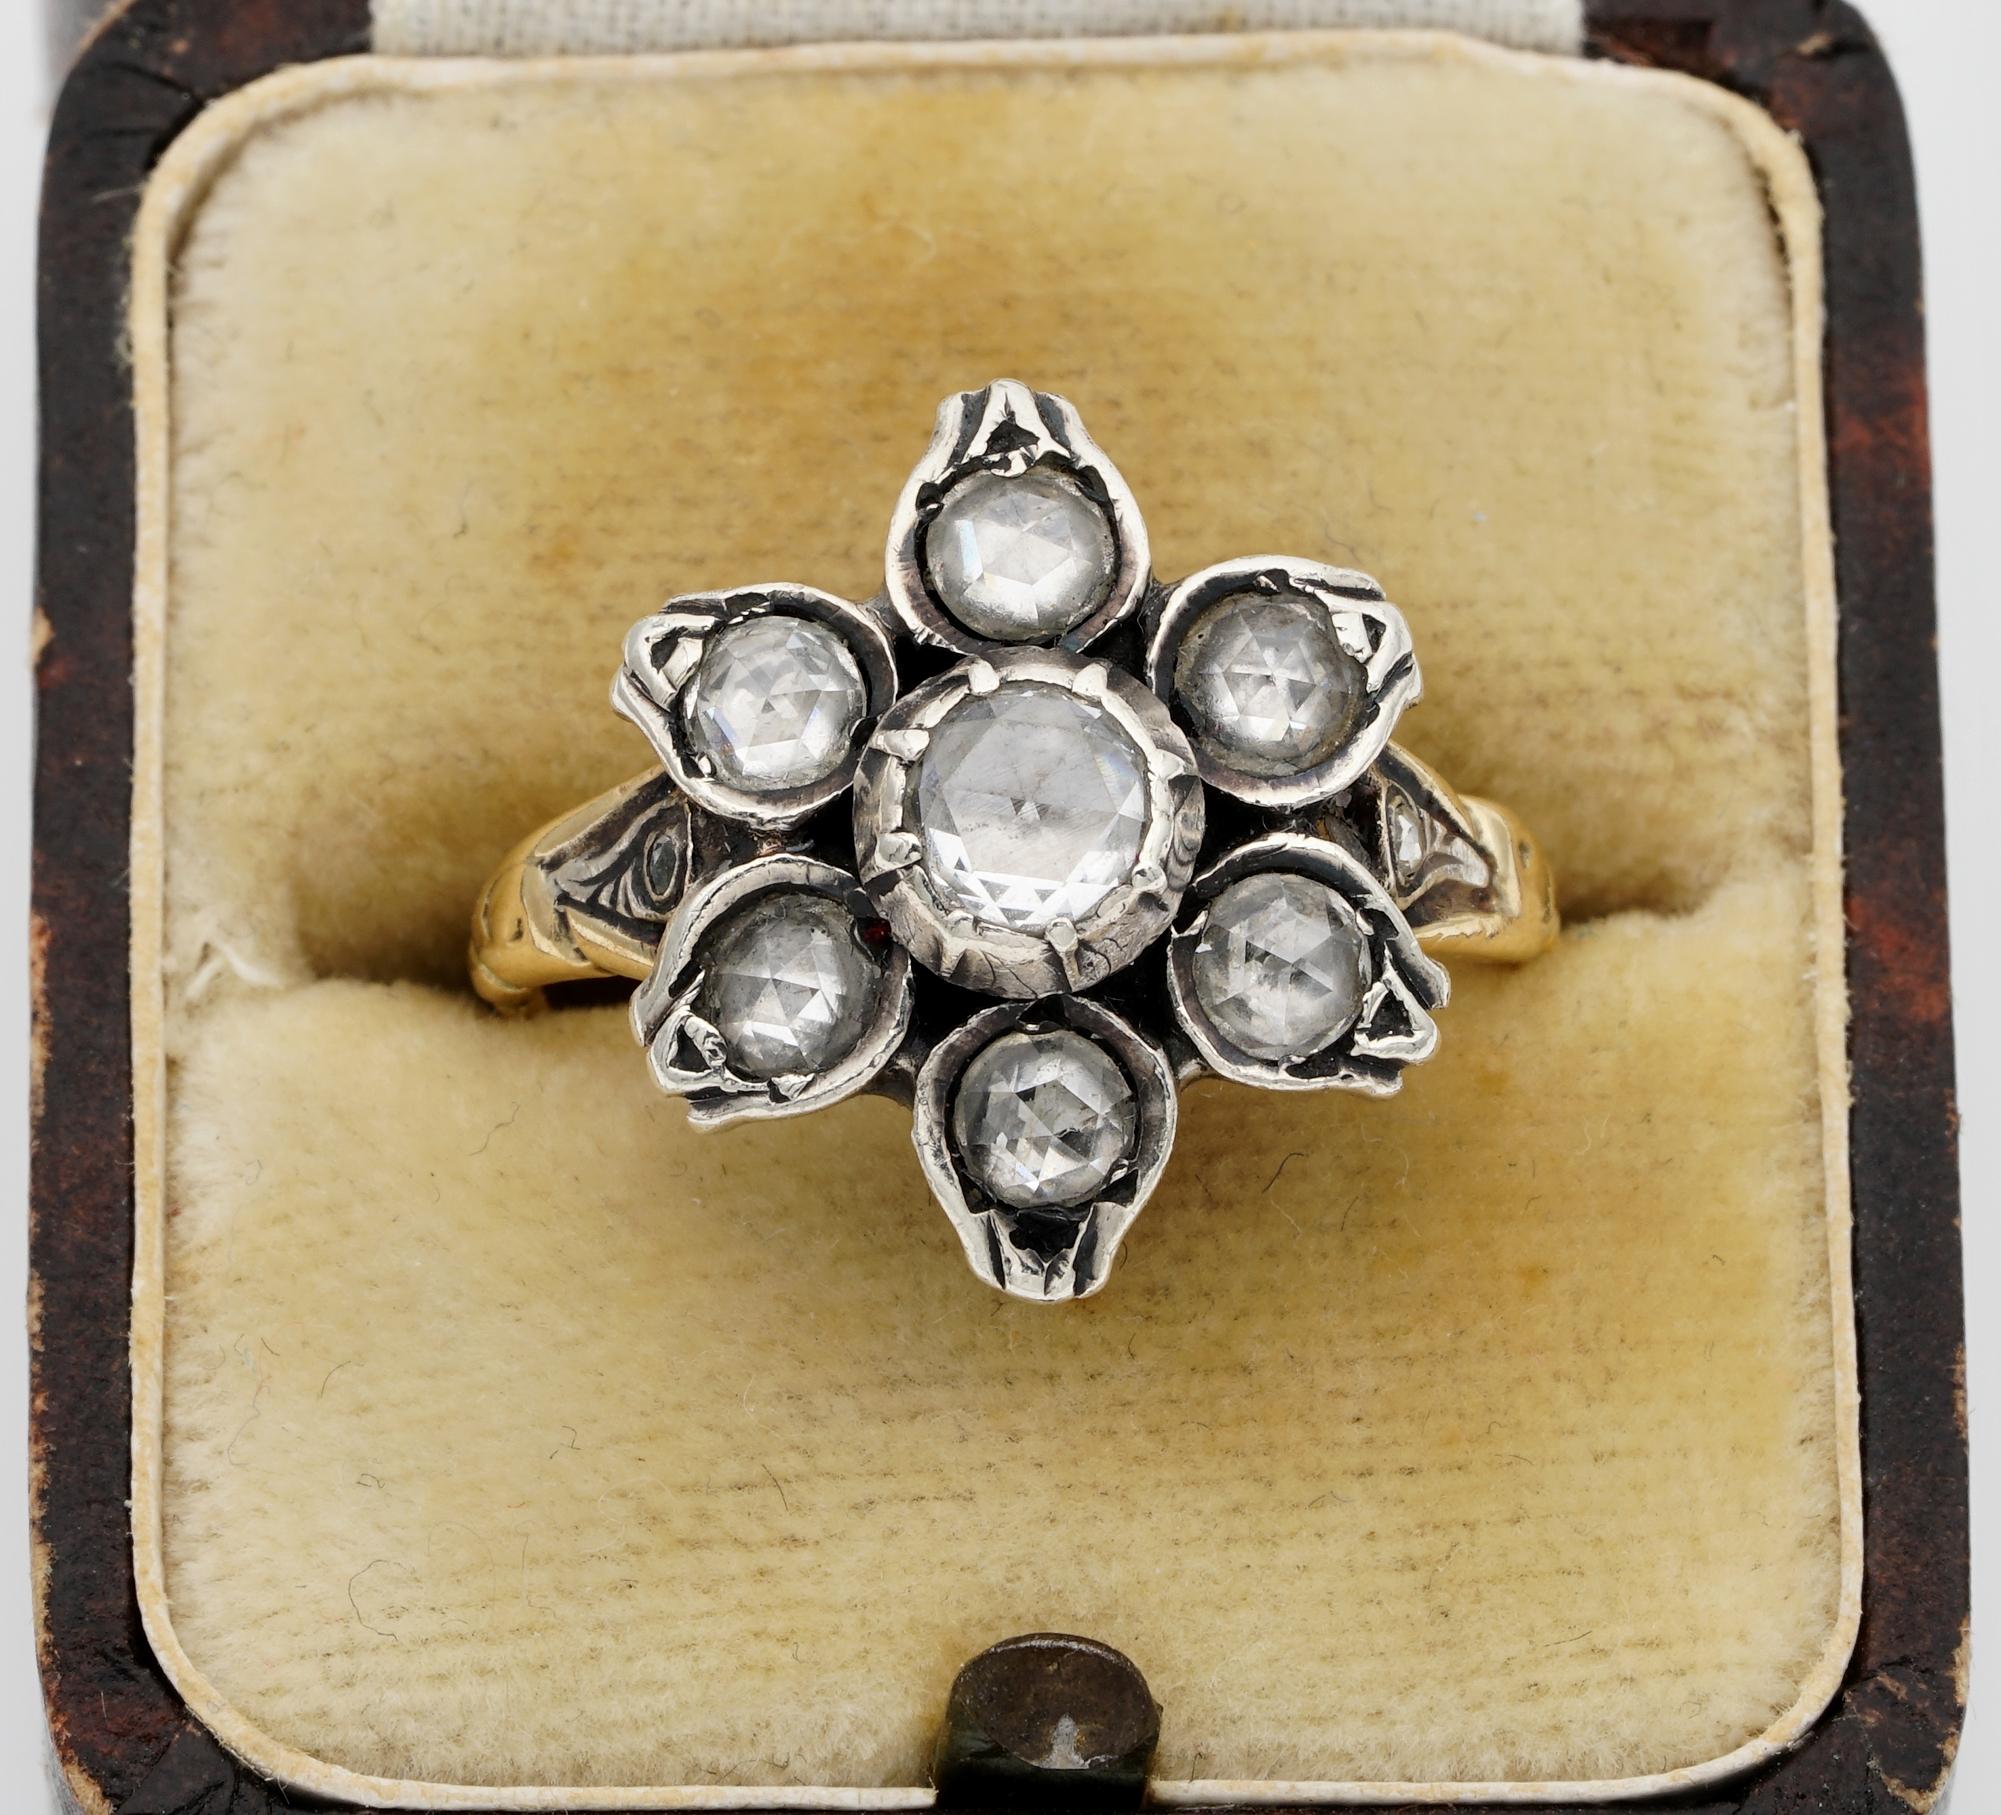 This gorgeous Victorian period Georgian style Diamond ring is 1900 ca
Hand crafted of solid 18 Kt gold with silver portions
Modelled as a sweet flower beautifully detailed and adorned with sparkly rose cut Diamonds
Approx. 1.10 Ct of Diamonds in